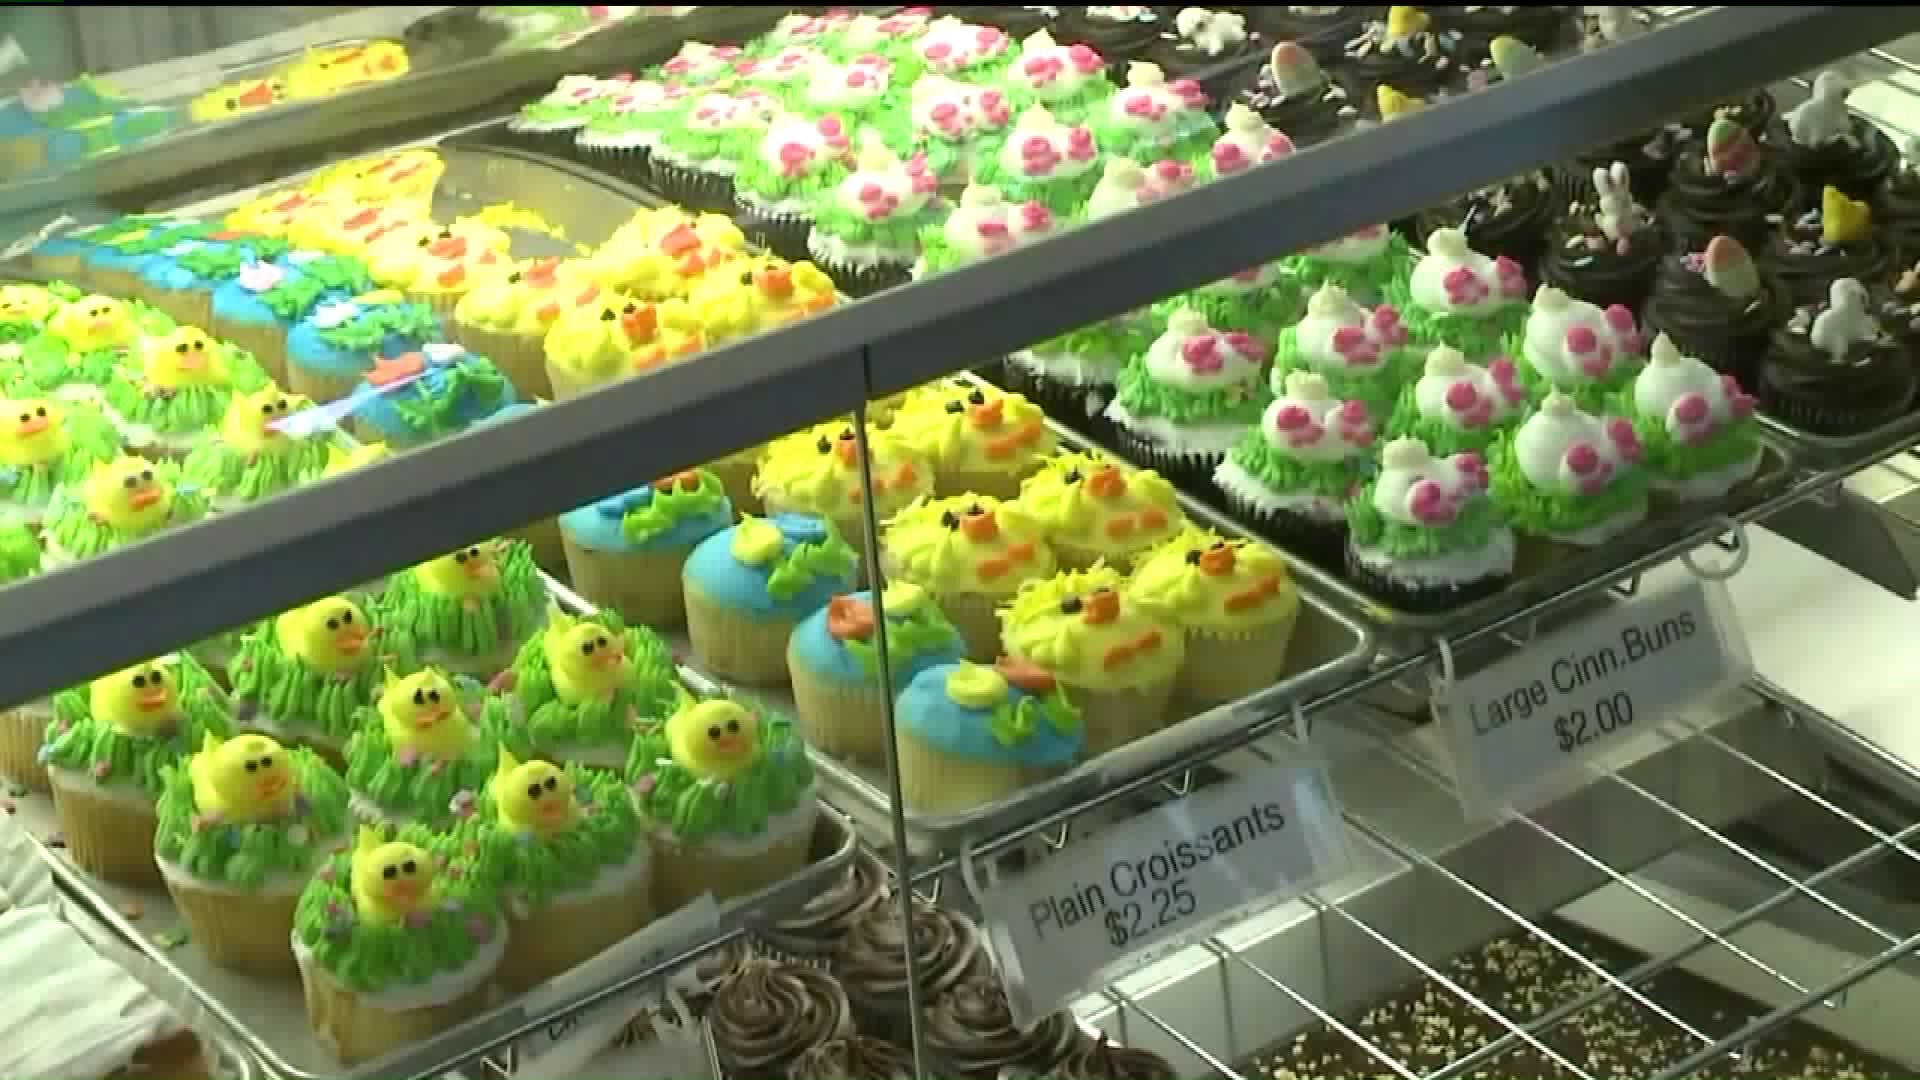 Bakery Famous for its Tasty Treats Gets Celebrity Visit on Good Friday